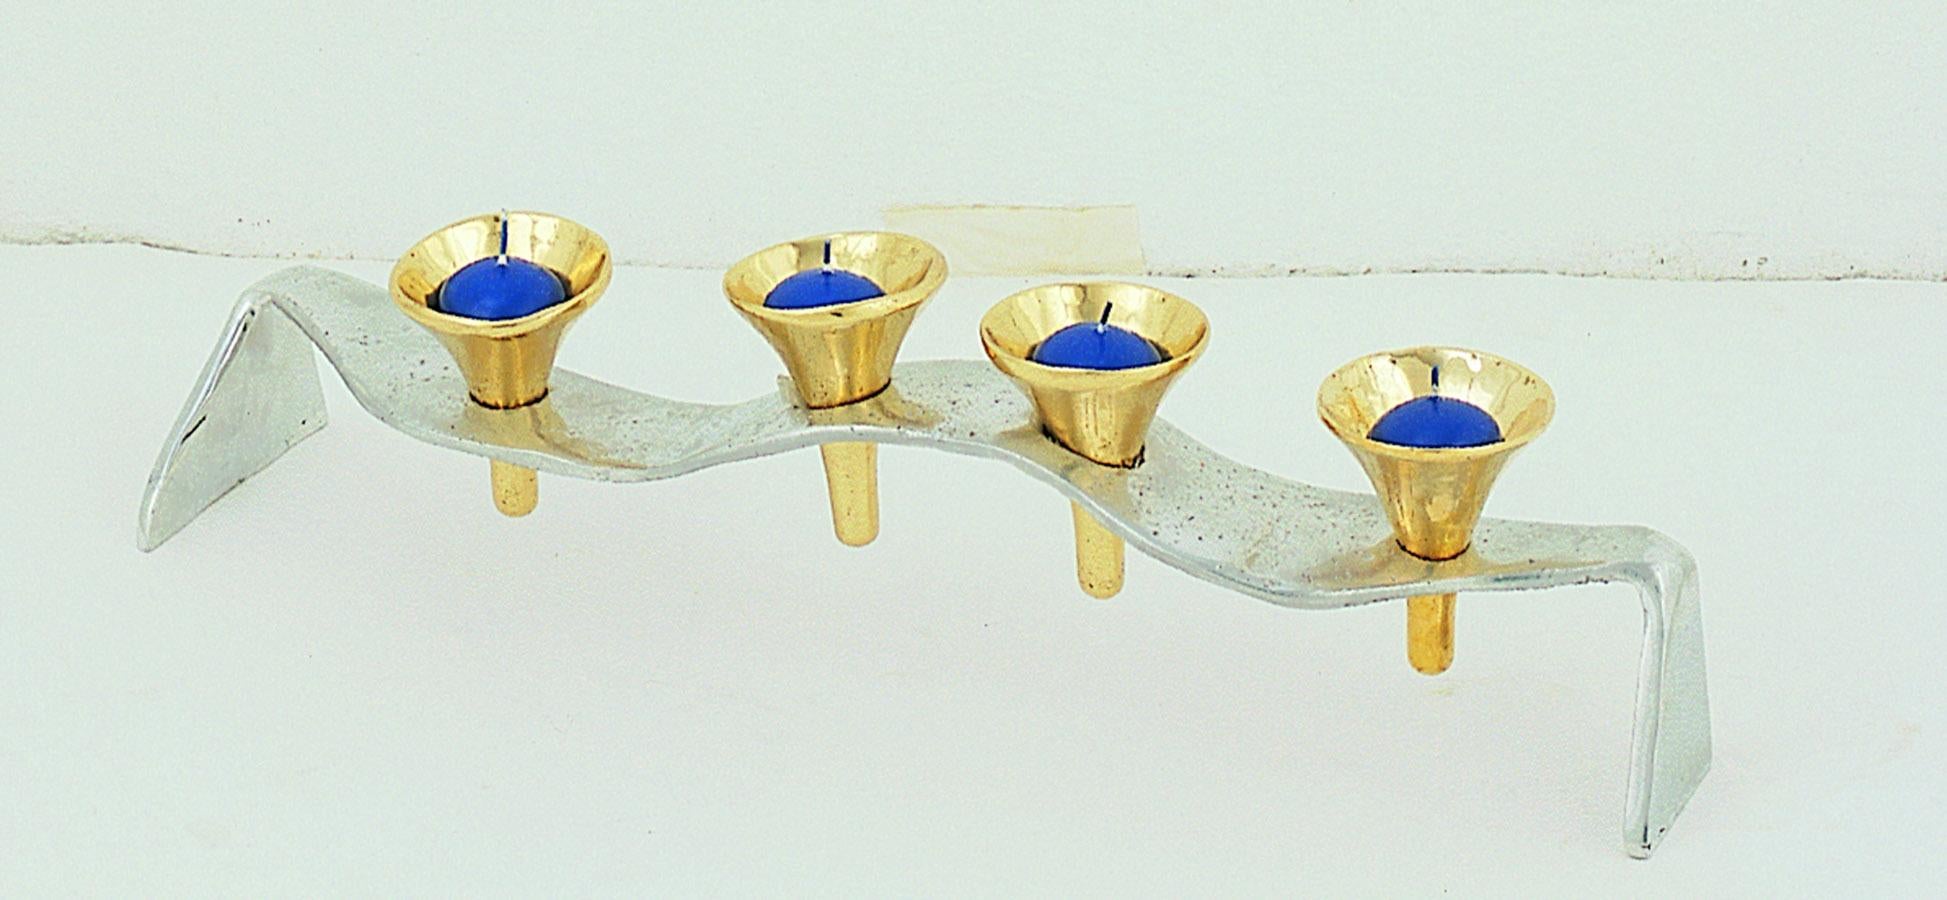 Candelabra Sinuoso 4 Velas made of solid Brass and Aluminium Handmade For Sale 1